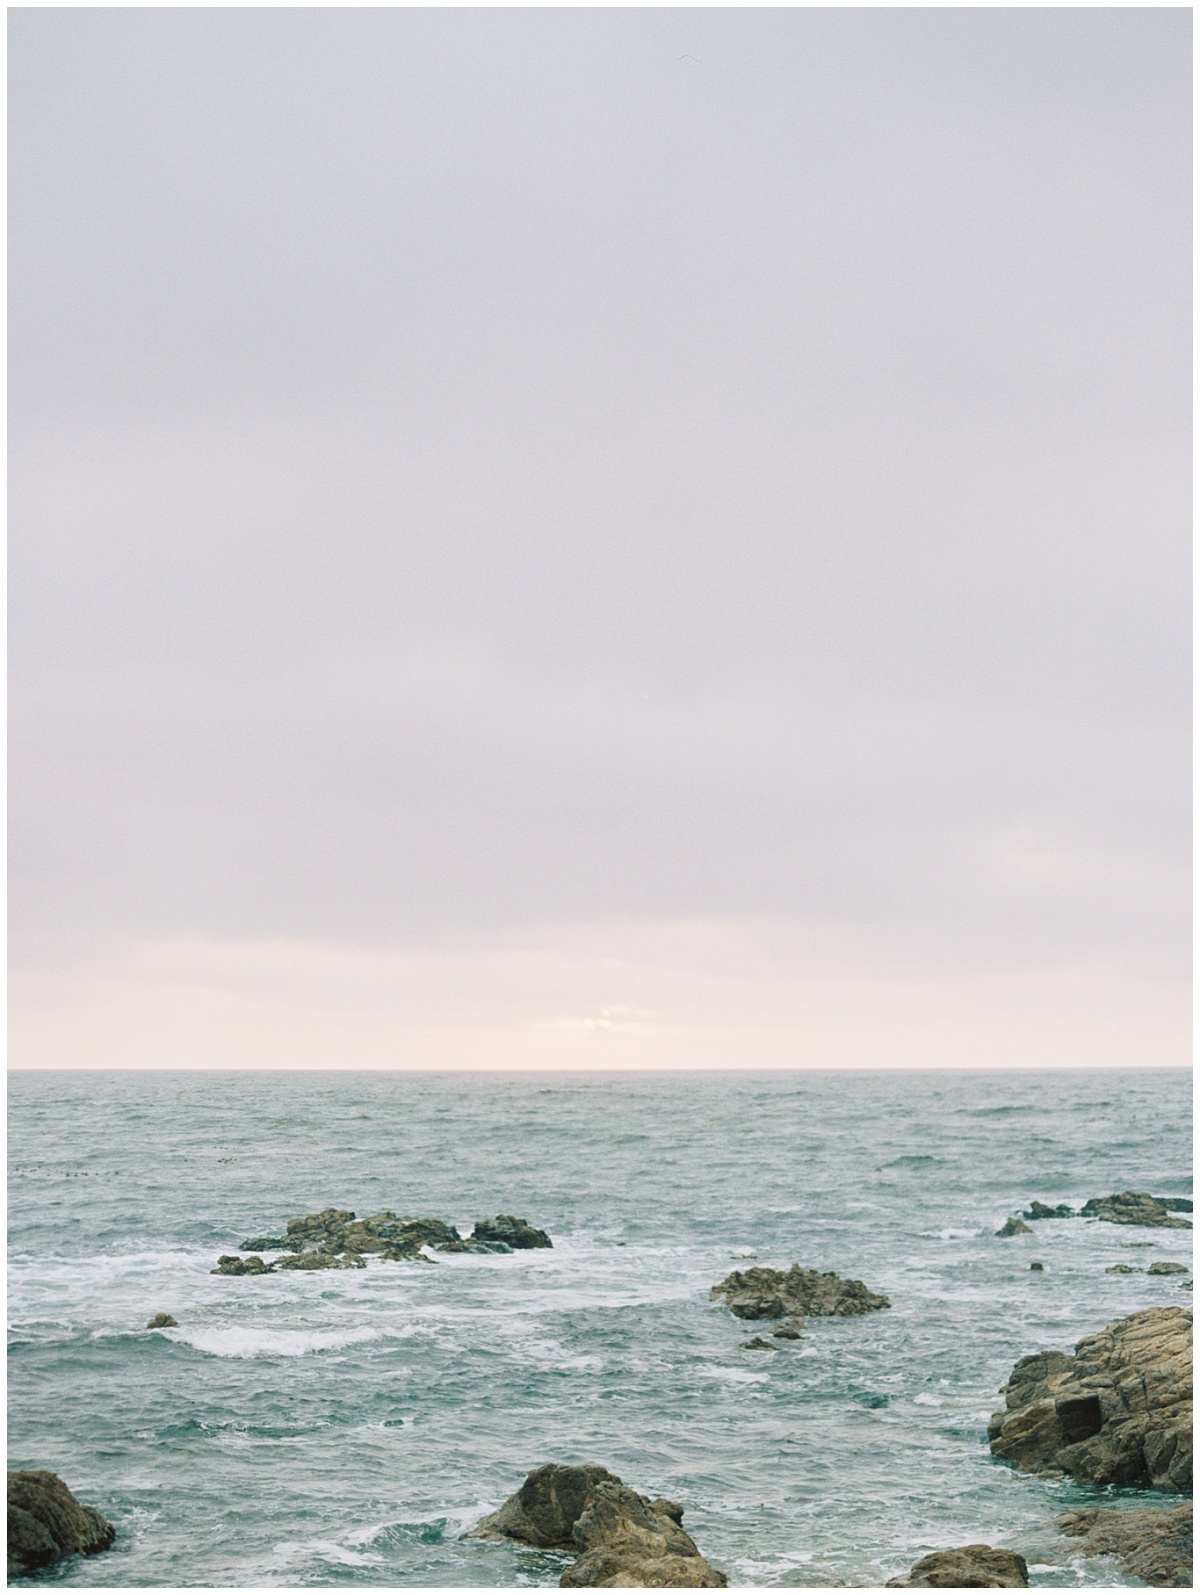 Monterey Coast captured during sunset and overcast skies on Portra 800